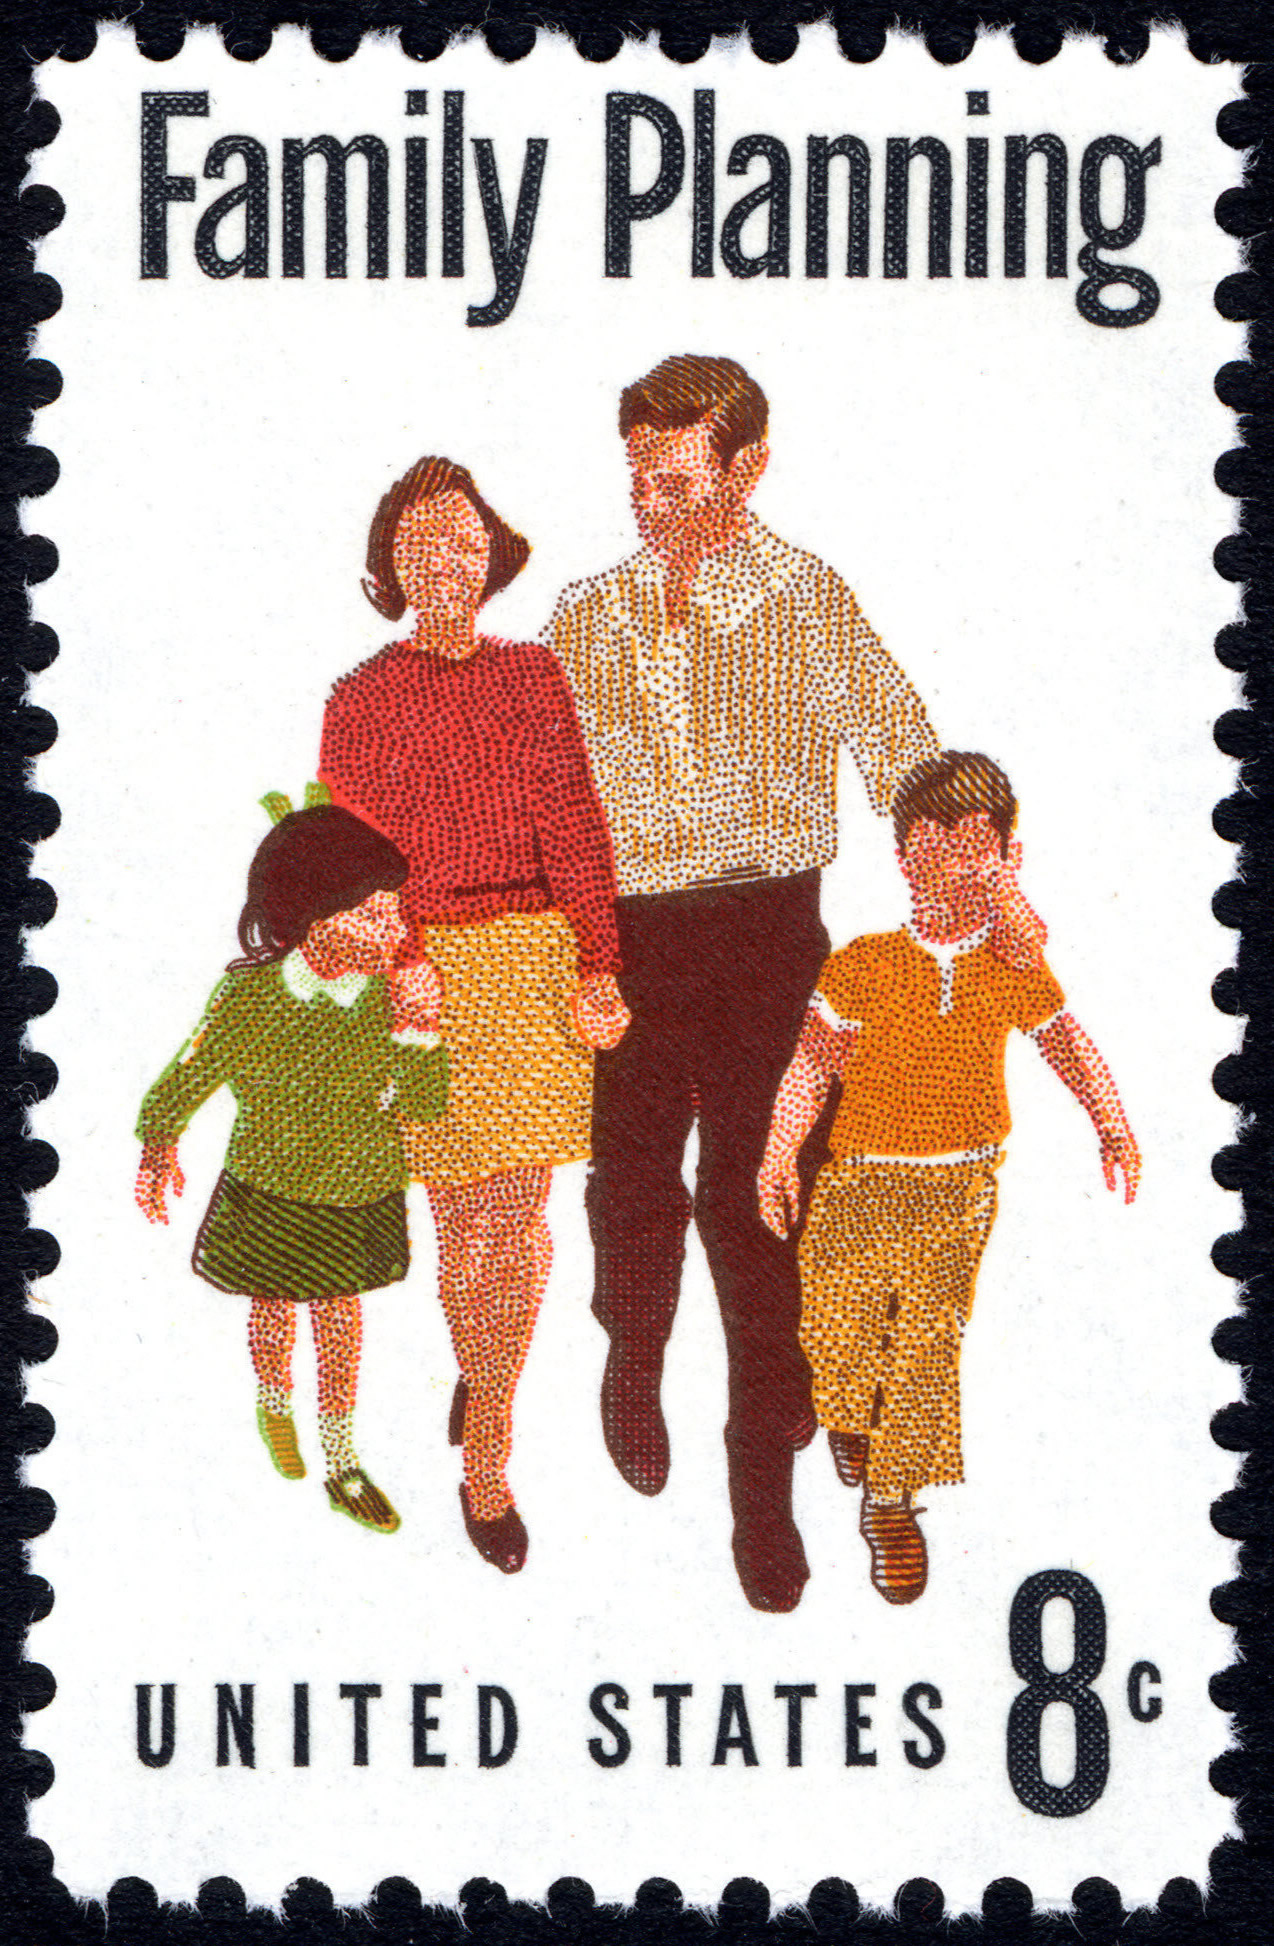 An old 8 cents postage stamp from the US with an image of a family of four.